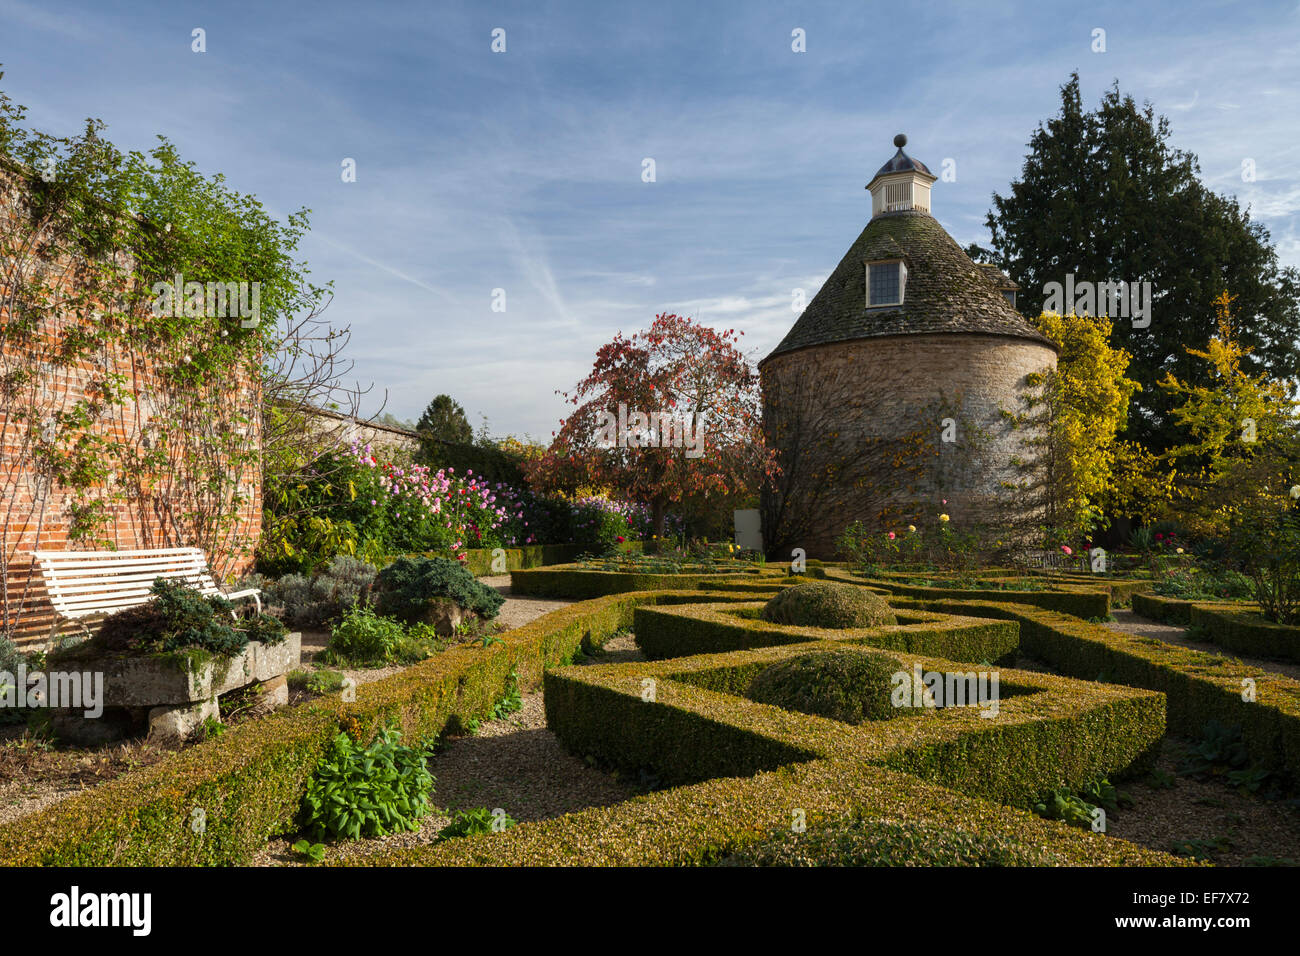 The geometric shapes of the box hedge parterre and c.1685 dovecote in the walled garden of Rousham House in early autumn, Oxfordshire, England Stock Photo